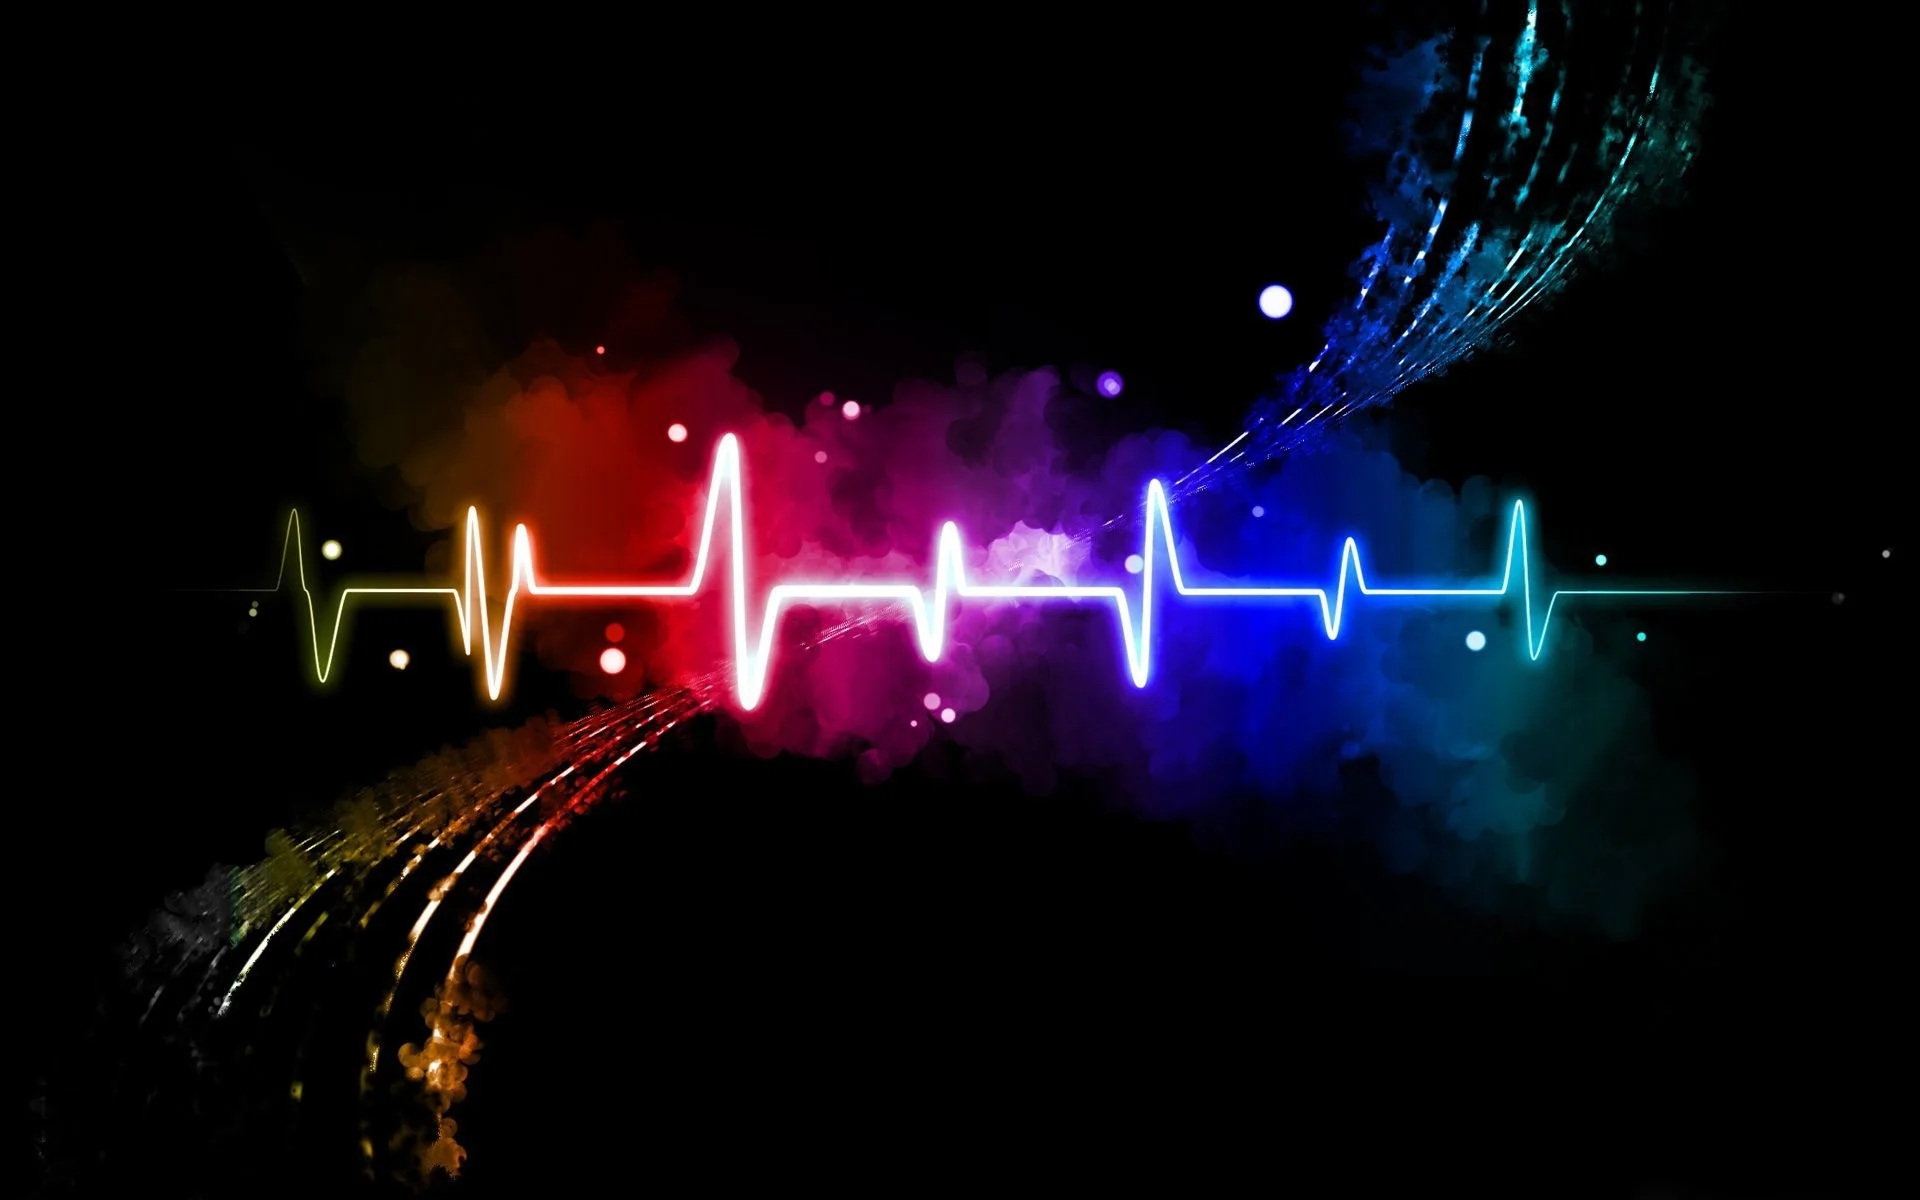 Two Heart Beating wallpaper by ShanBX  Download on ZEDGE  abe0